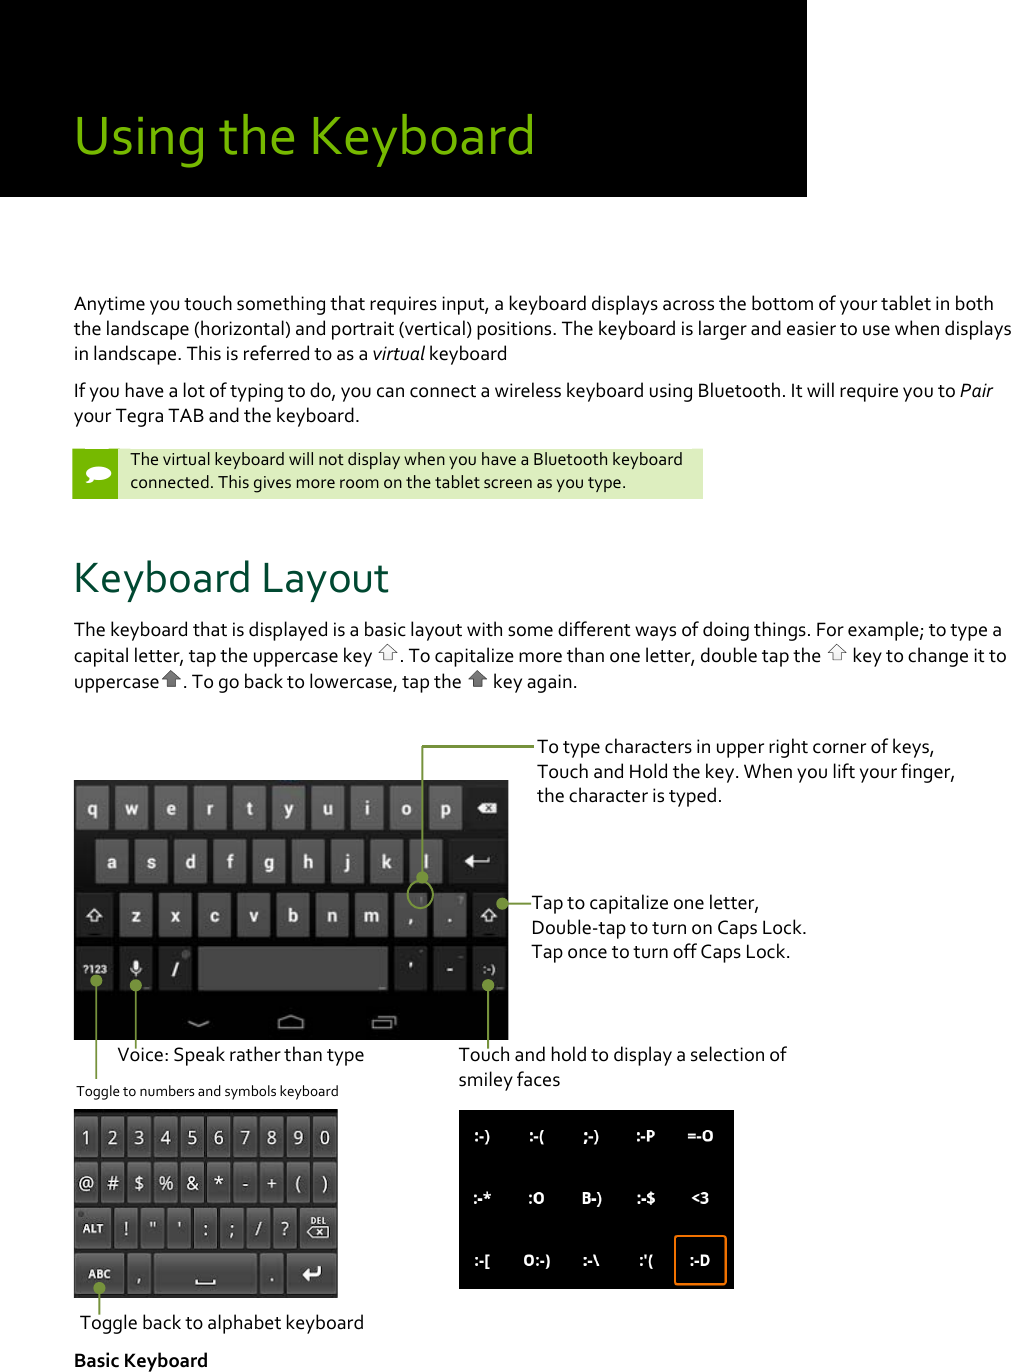 UsingtheKeyboardAnytimeyoutouchsomethingthatrequiresinput,akeyboarddisplaysacrossthebottomofyourtabletinboththelandscape(horizontal)andportrait(vertical)positions.Thekeyboardislargerandeasiertousewhendisplaysinlandscape.ThisisreferredtoasavirtualkeyboardIfyouhavealotoftypingtodo,youcanconnectawirelesskeyboardusingBluetooth.ItwillrequireyoutoPairyourTegraTABandthekeyboard.ThevirtualkeyboardwillnotdisplaywhenyouhaveaBluetoothkeyboardconnected.Thisgivesmoreroomonthetabletscreenasyoutype.KeyboardLayoutThekeyboardthatisdisplayedisabasiclayoutwithsomedifferentwaysofdoingthings.Forexample;totypeacapitalletter,taptheuppercasekey.Tocapitalizemorethanoneletter,doubletapthe keytochangeittouppercase .Togobacktolowercase,tapthe keyagain.BasicKeyboardTaptocapitalizeoneletter,Double‐taptoturnonCapsLock.TaponcetoturnoffCapsLock.ToggletonumbersandsymbolskeyboardVoice:Speakratherthantype TouchandholdtodisplayaselectionofsmileyfacesTotypecharactersinupperrightcornerofkeys,TouchandHoldthekey.Whenyouliftyourfinger,thecharacteristyped.Togglebacktoalphabetkeyboard